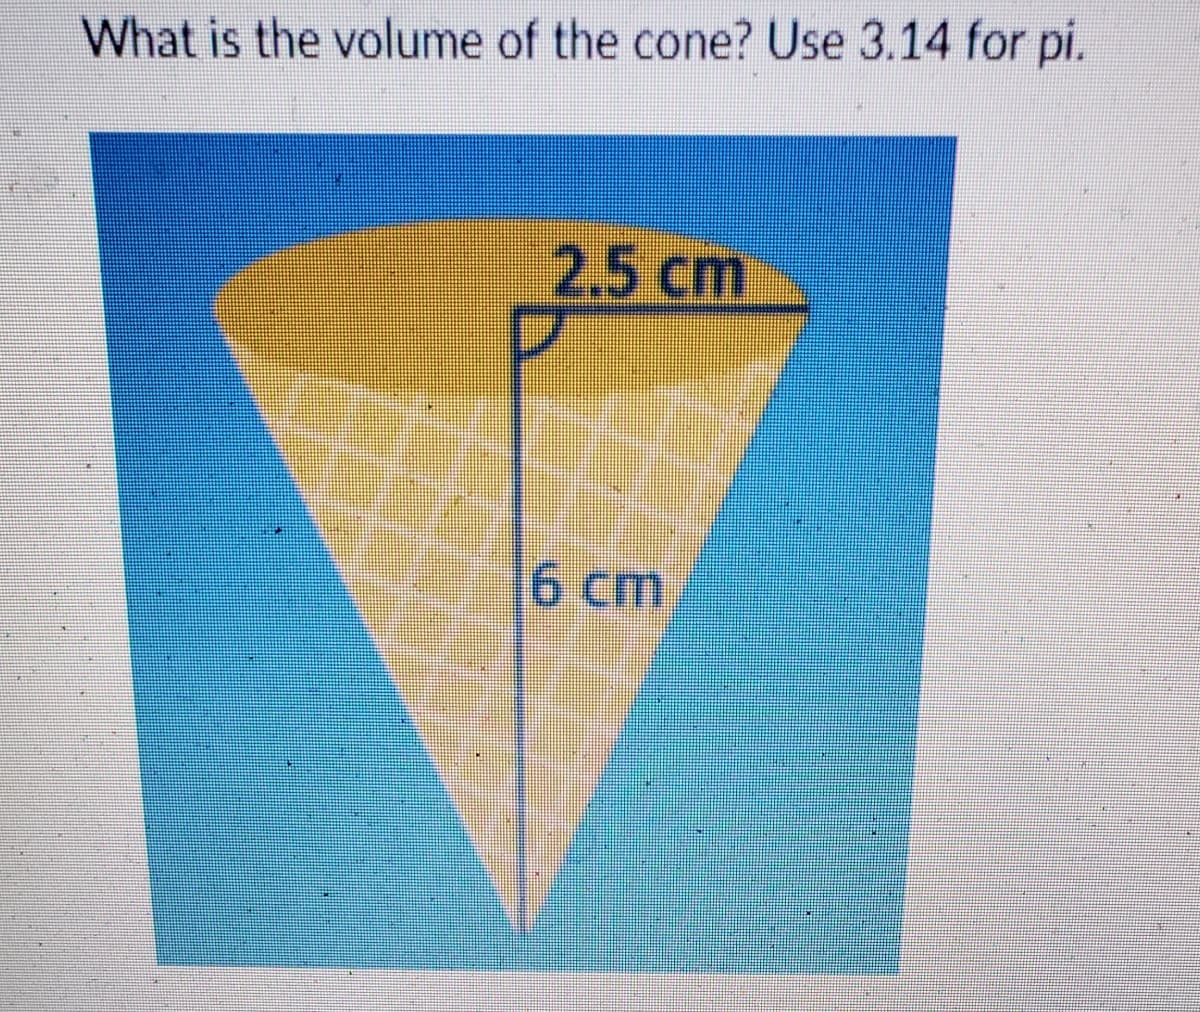 What is the volume of the cone? Use 3.14 for pi.
2.5 cm
D
6 cm